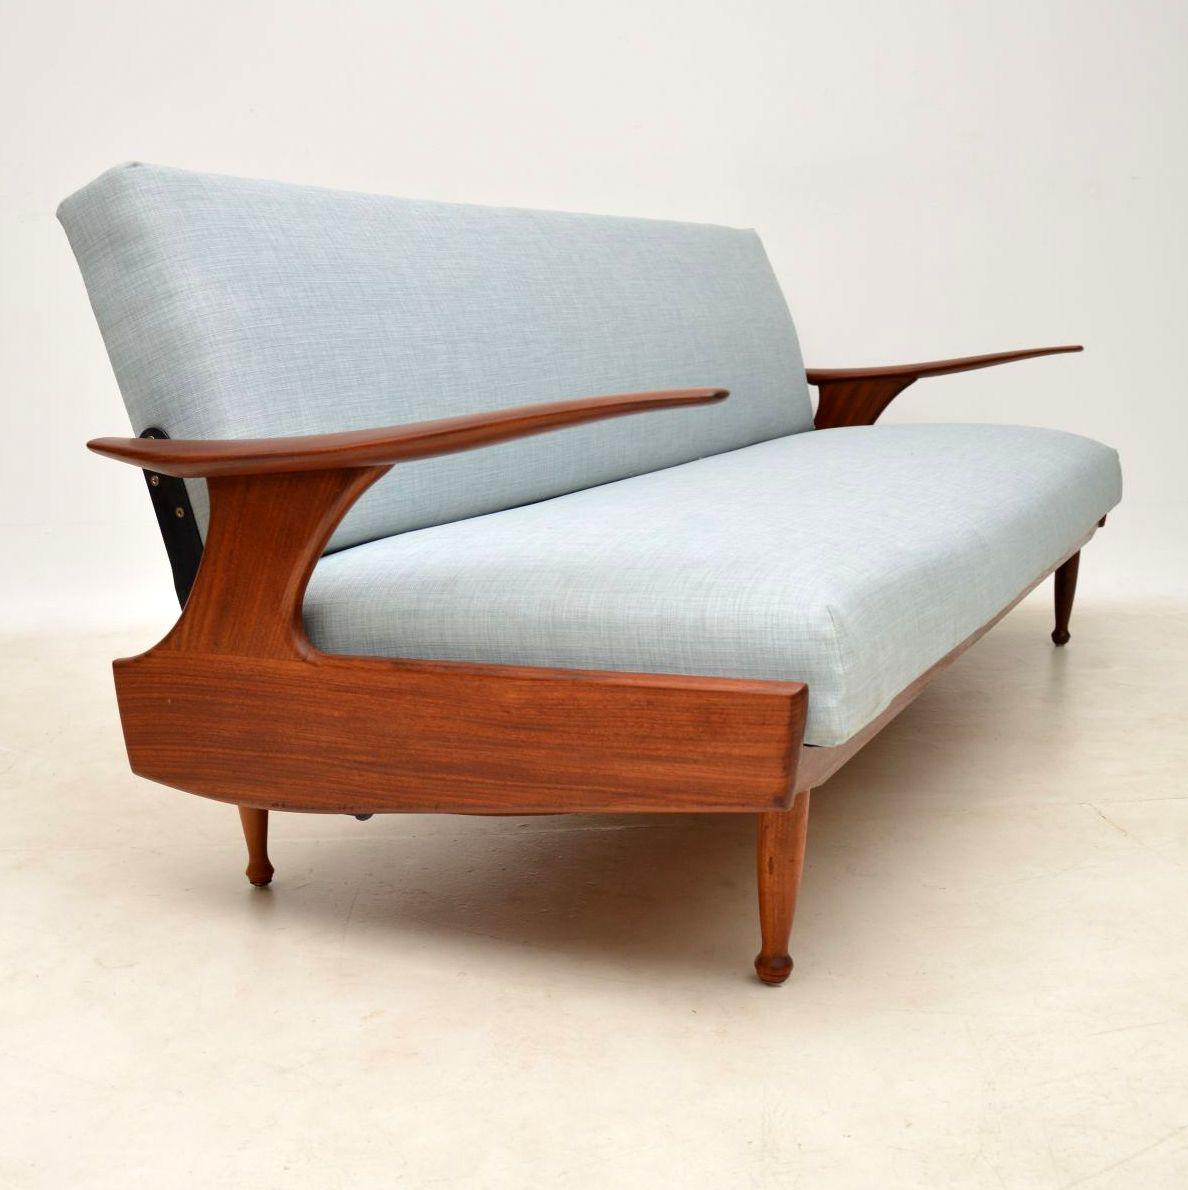 An amazing vintage sofa bed by the high end manufacturer Greaves and Thomas, this is beautifully made from solid afromosia wood. The design is really stunning and quite unusual, with lovely sweeping arms that appear to float. The condition is